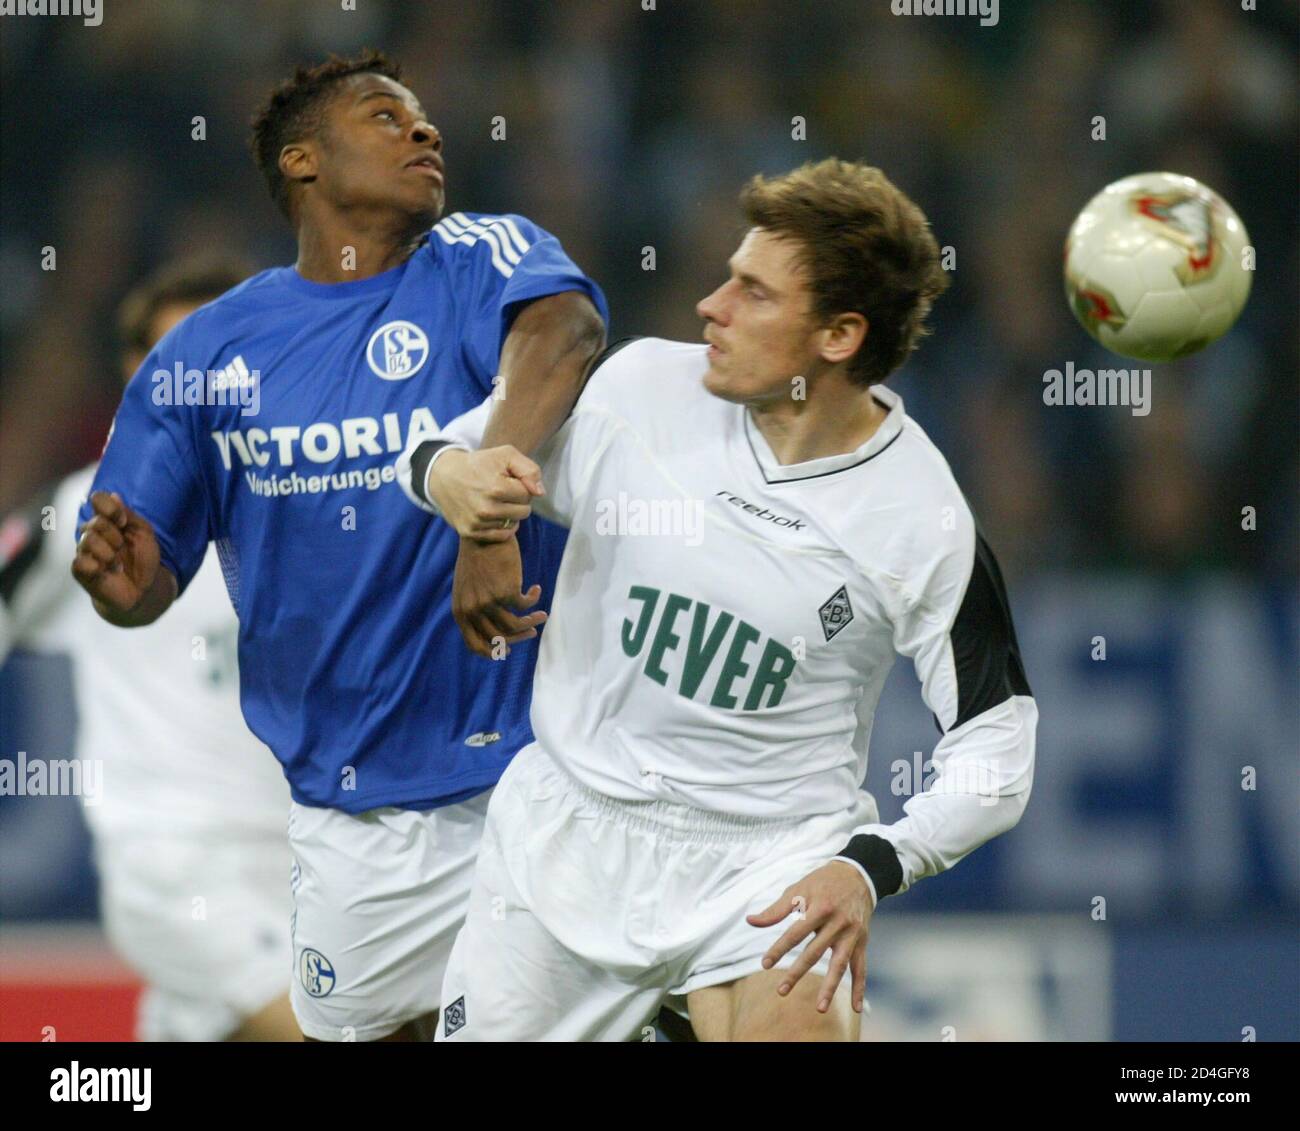 MPENZA OF SCHALKE AND KORELL OF MOENCHENGLADBACH HEAD THE BALL DURING A GERMAN SOCCER CUP MATCH IN GELSENKIRCHEN. Stock Photo